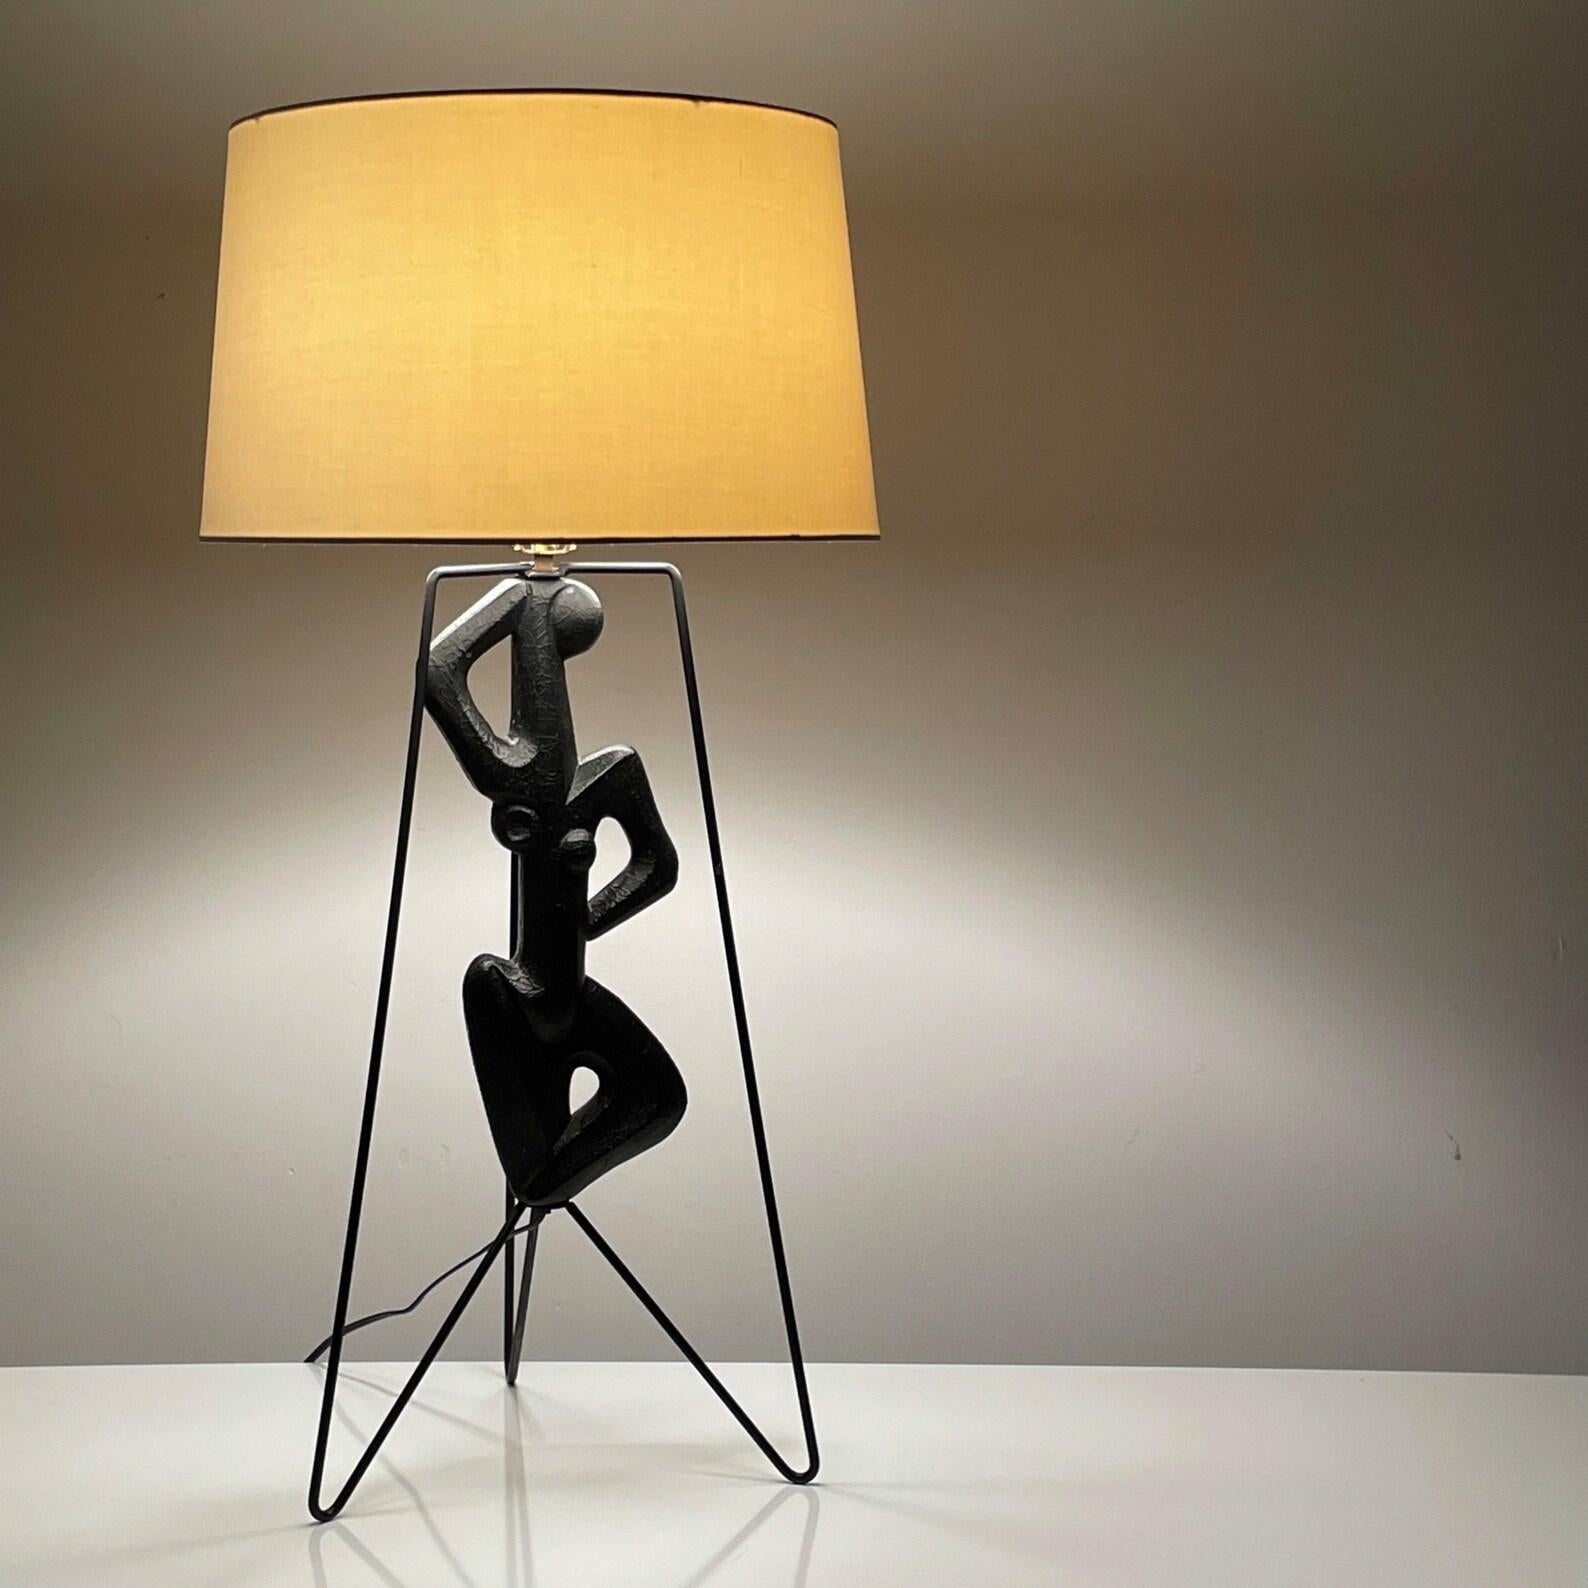 Rare table lamp designed by Frederic Weinberg circa 1950s
Cubist female figure in plaster with black finish, framed in an iron hairpin base.
Newer shade